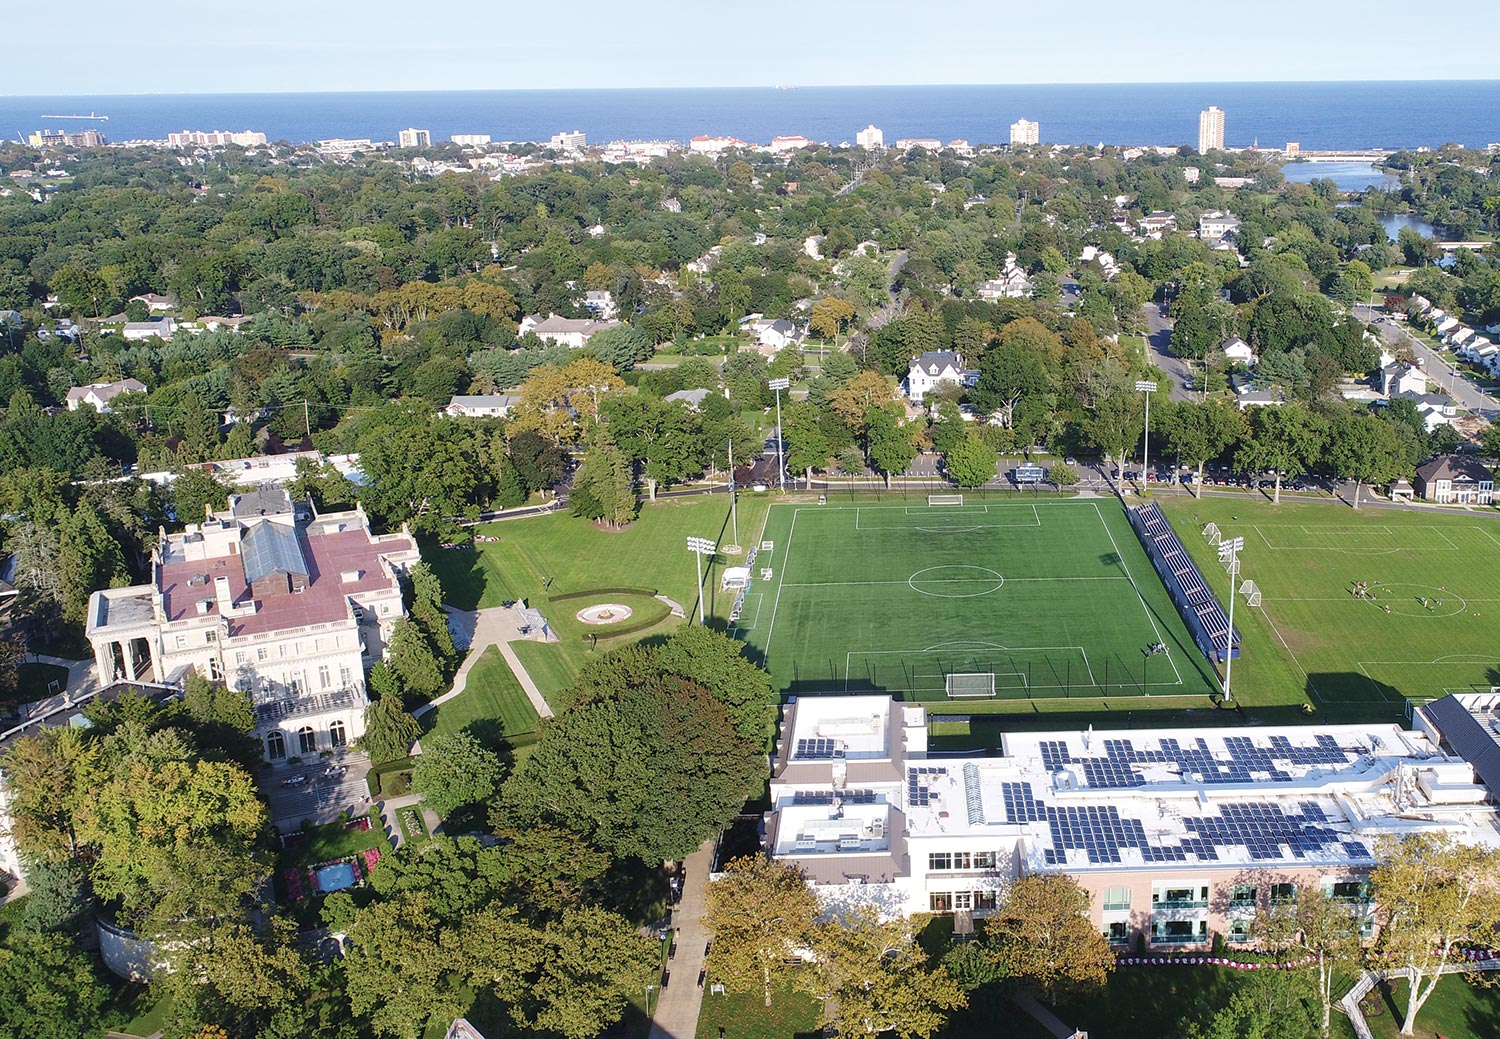 An aerial landscape photograph perspective of the Monmouth University campus